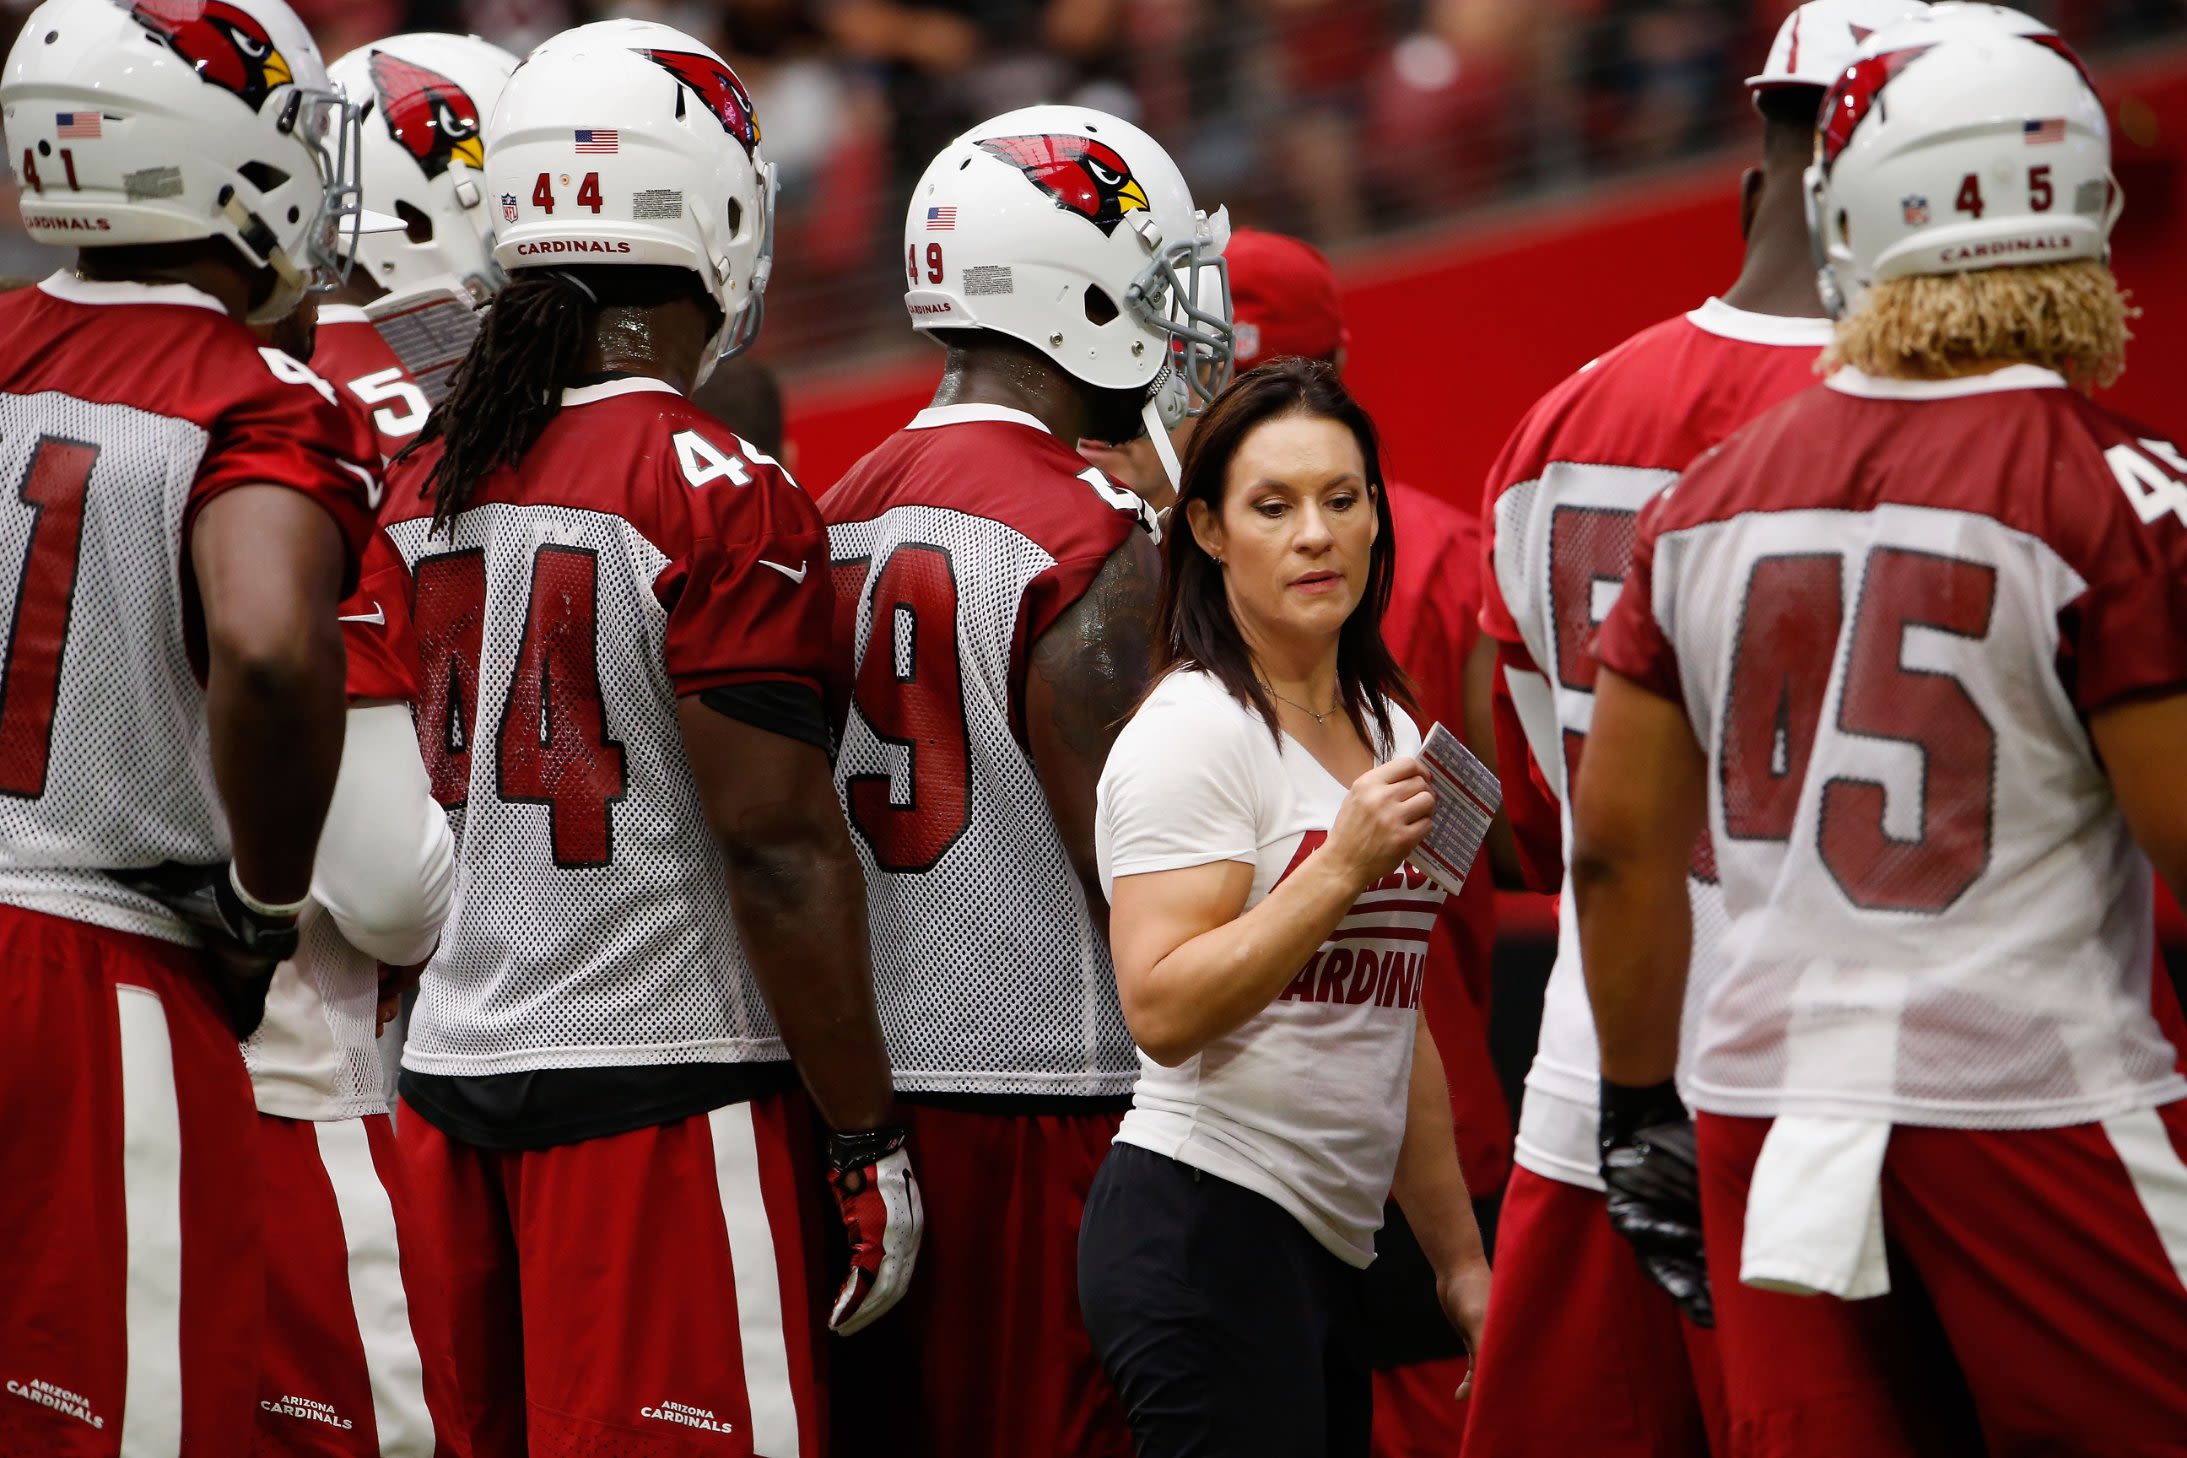 NFL's first female assistant coach to share her story, skills at local camp